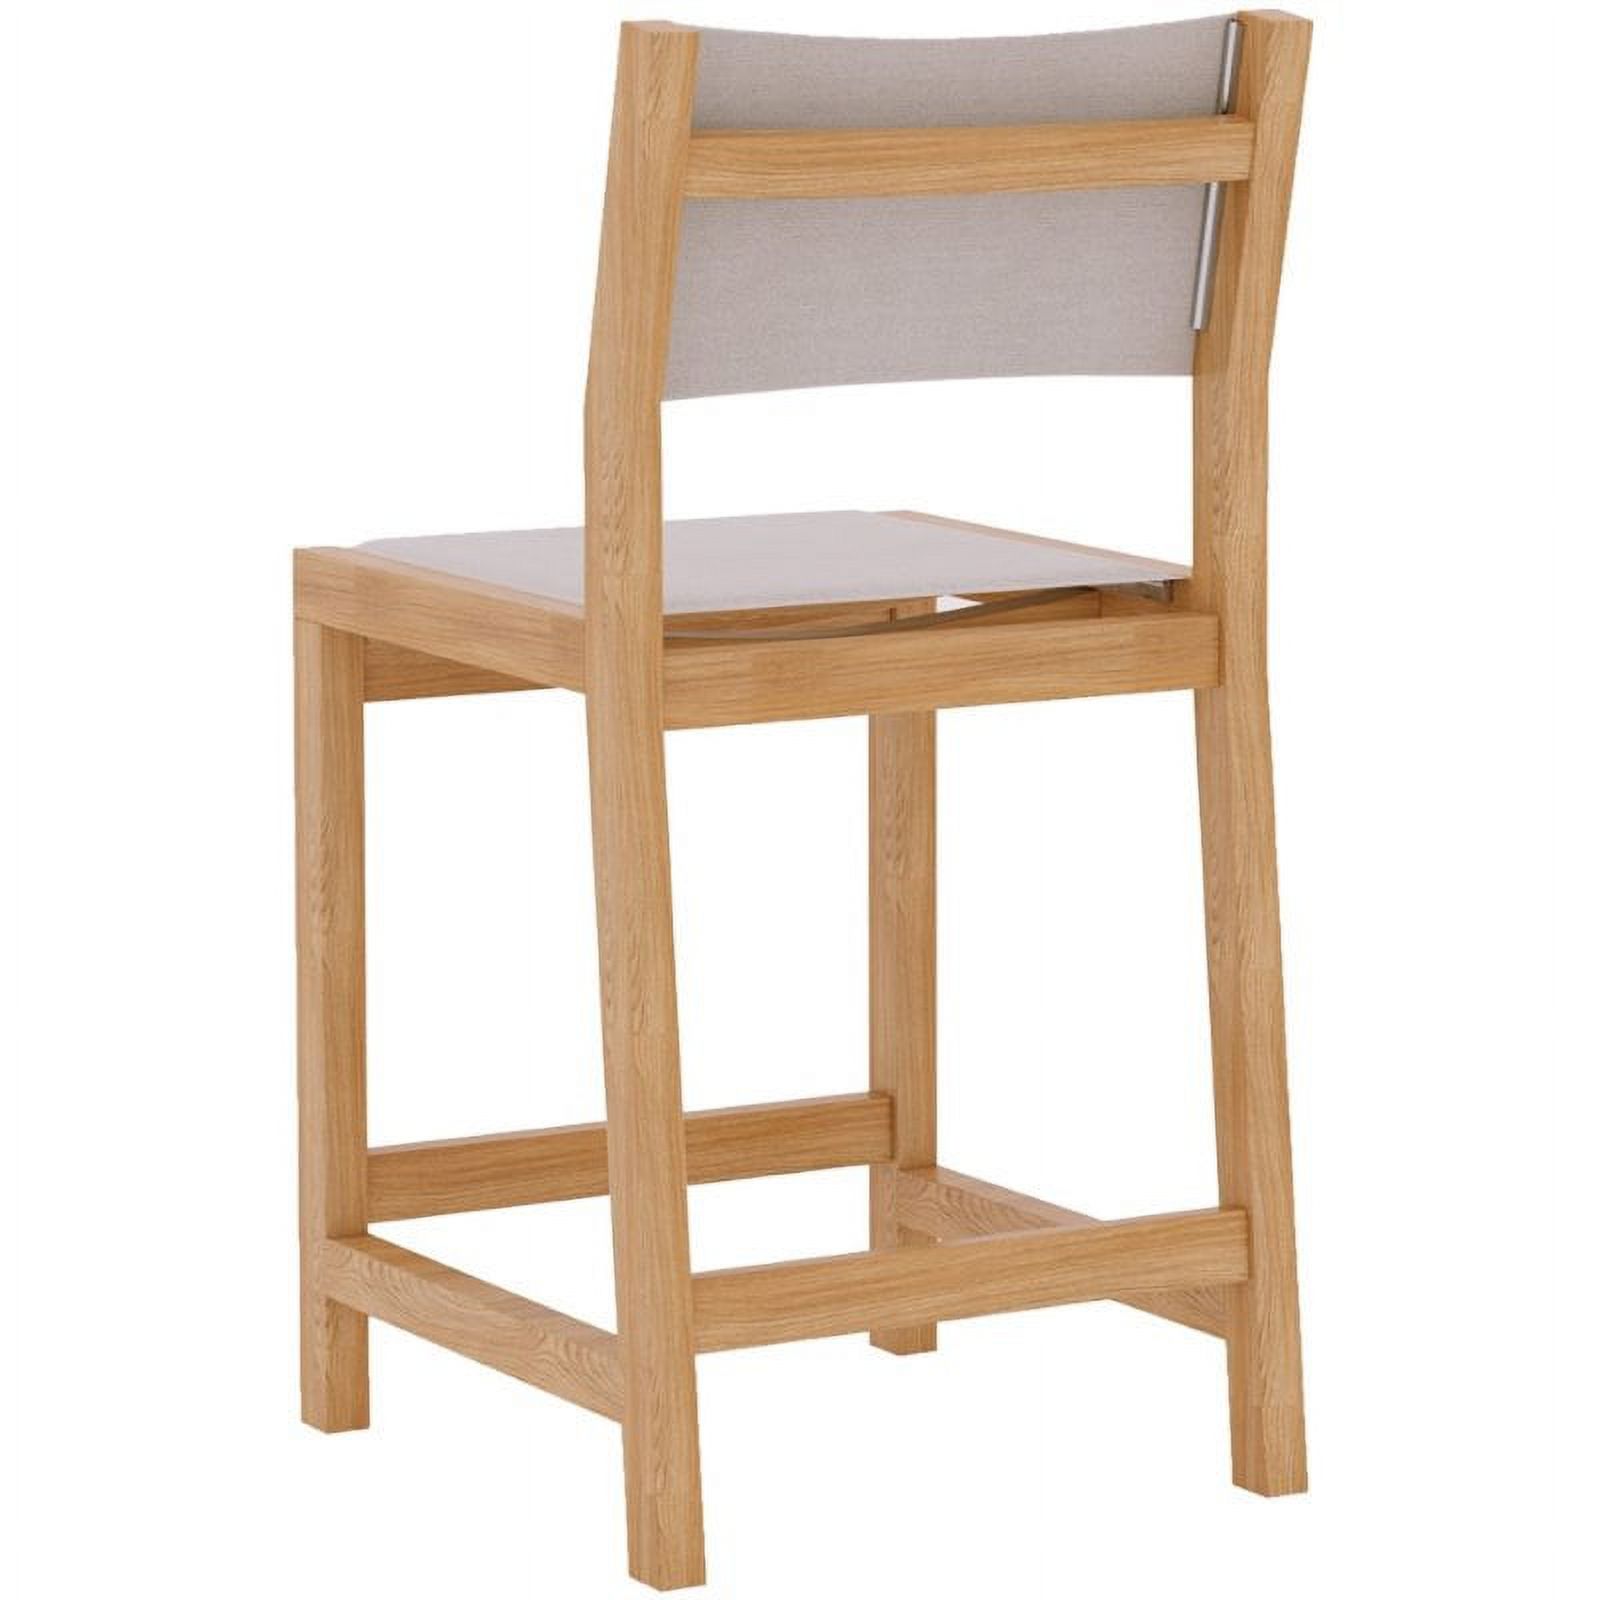 Home Square 26" Teak Wooden Patio Counter Stool in Natural and White - Set of 2 - image 4 of 4